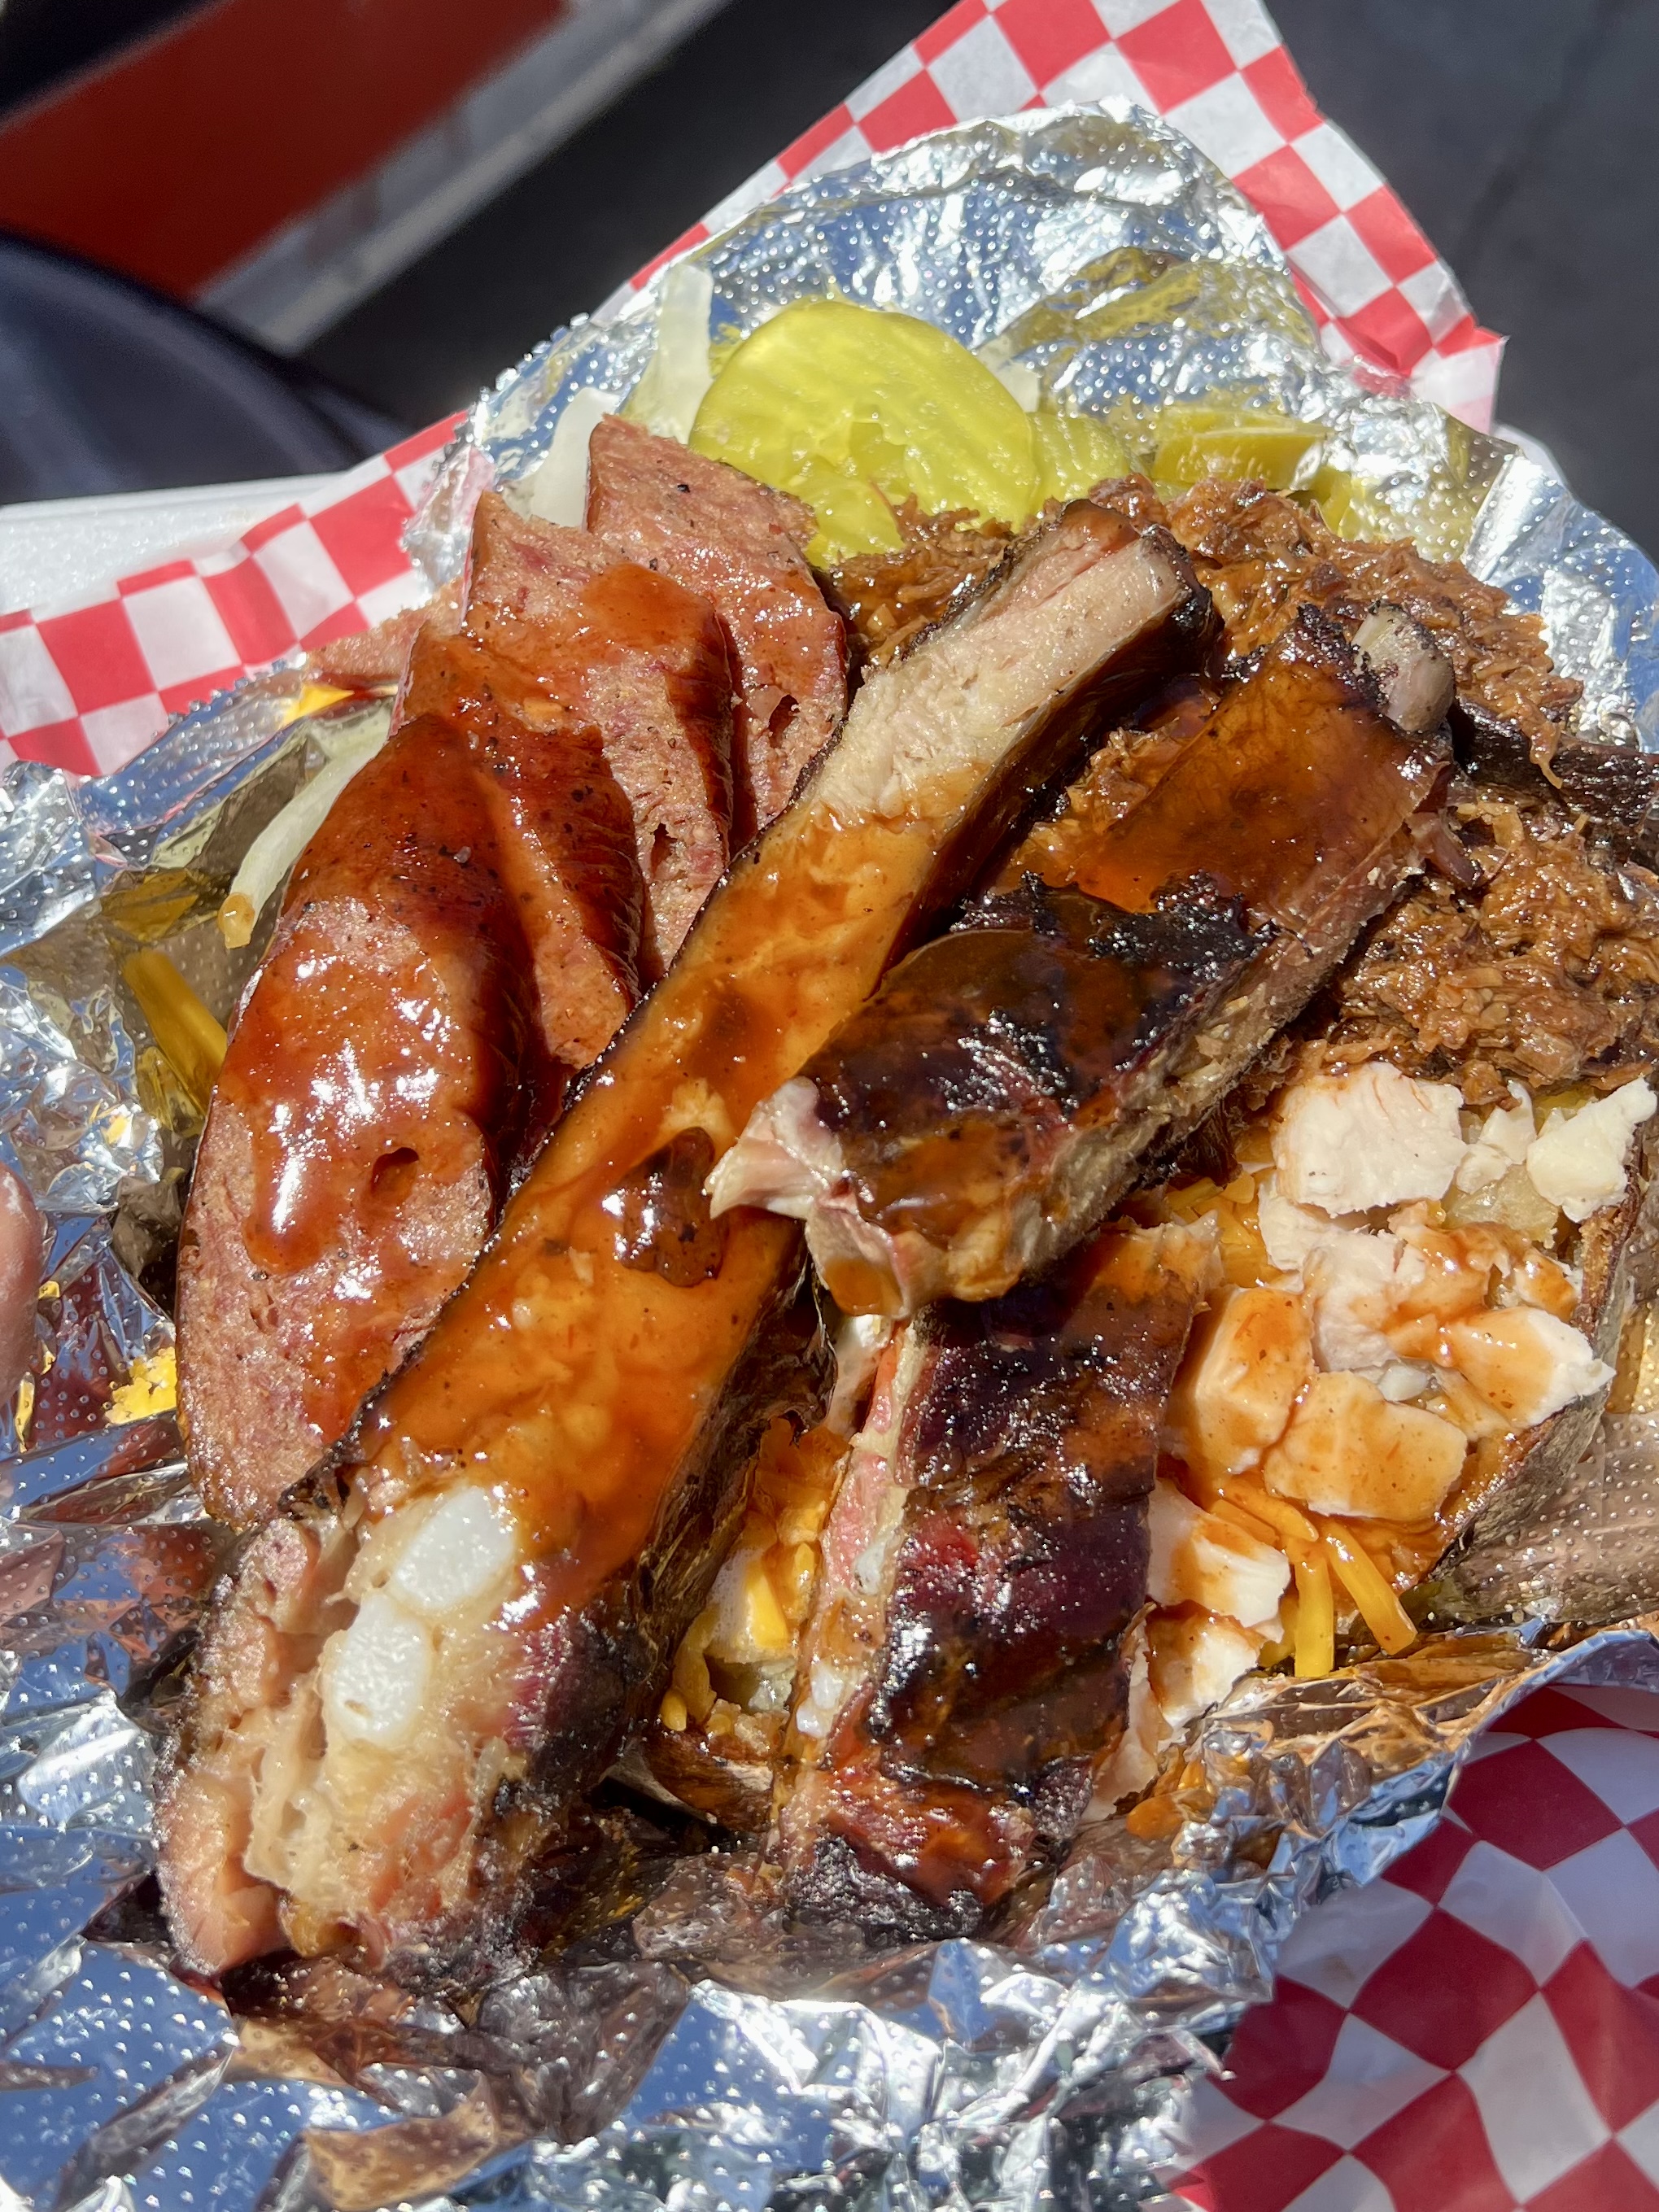 Explore a foodie’s paradise at the Houston Livestock Show and Rodeo |  Houston Style Magazine